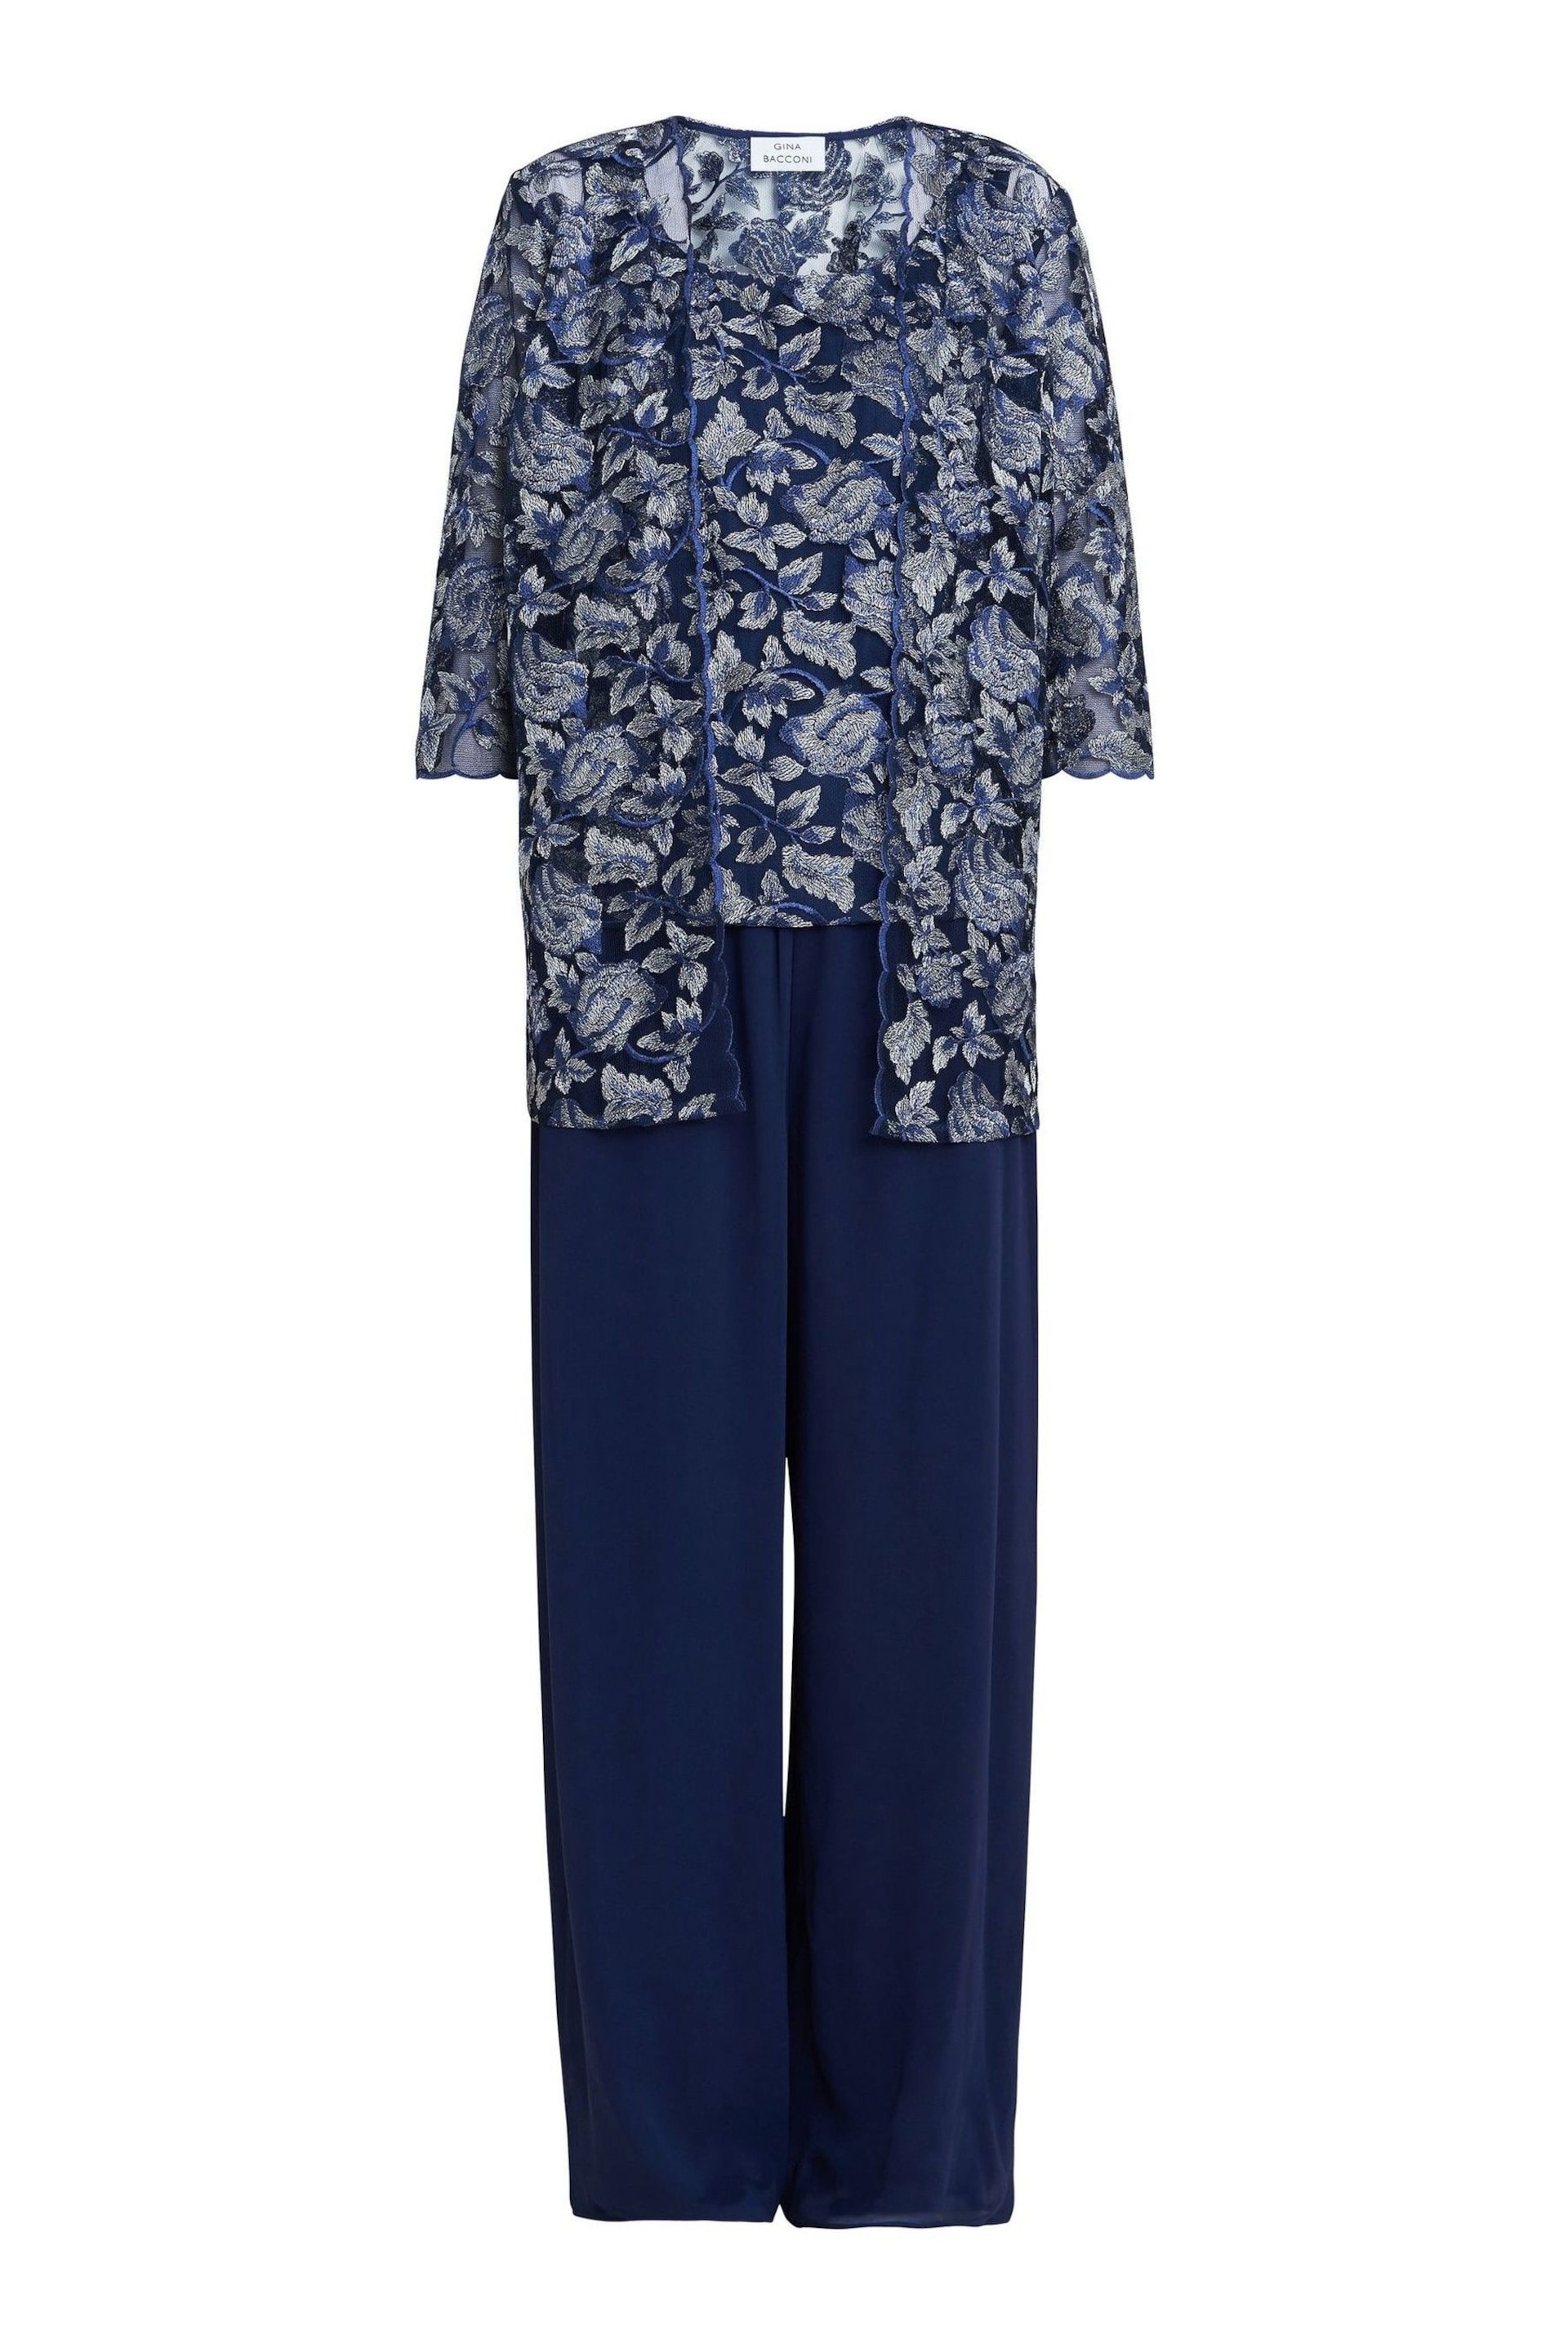 Gina Bacconi Blue Nikki 3 Piece Trousers Suit: With Embroidered Tank Top And Elongated Jacket - Image 6 of 6